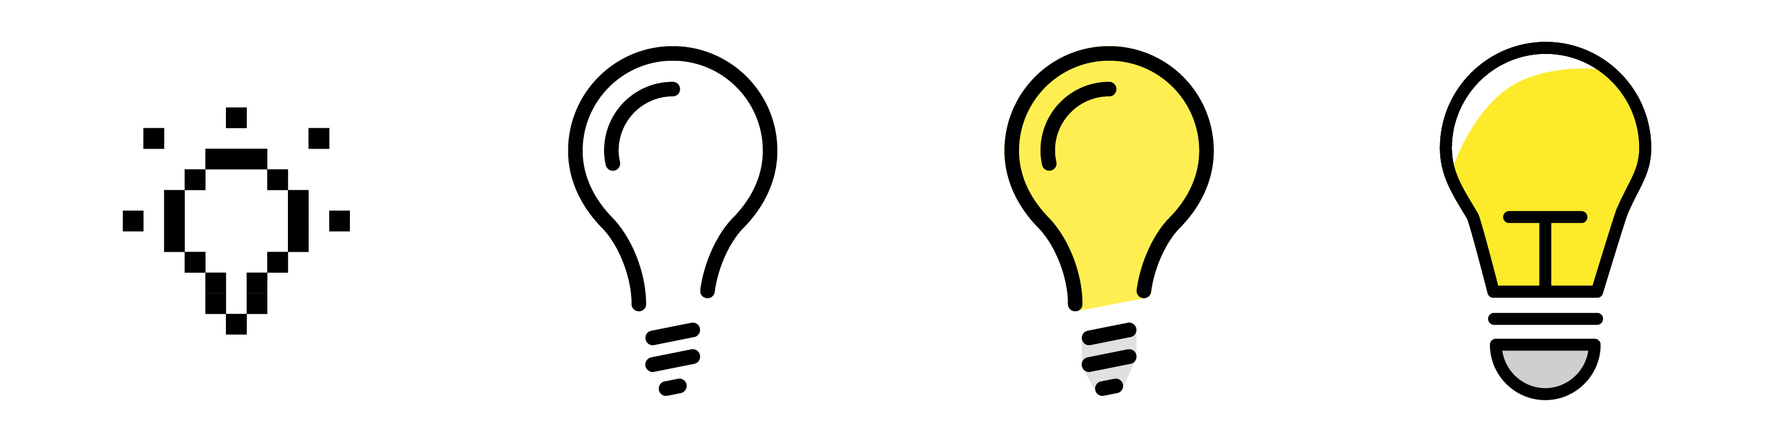 Drawing pixel icons sharpens perception of the most essential parts of objects. Next up: black and white vector icons with less restrictions on dimensions and vector icons with color. To the right the official light bulb emoji adhering to our style guide. (Not created by me.)